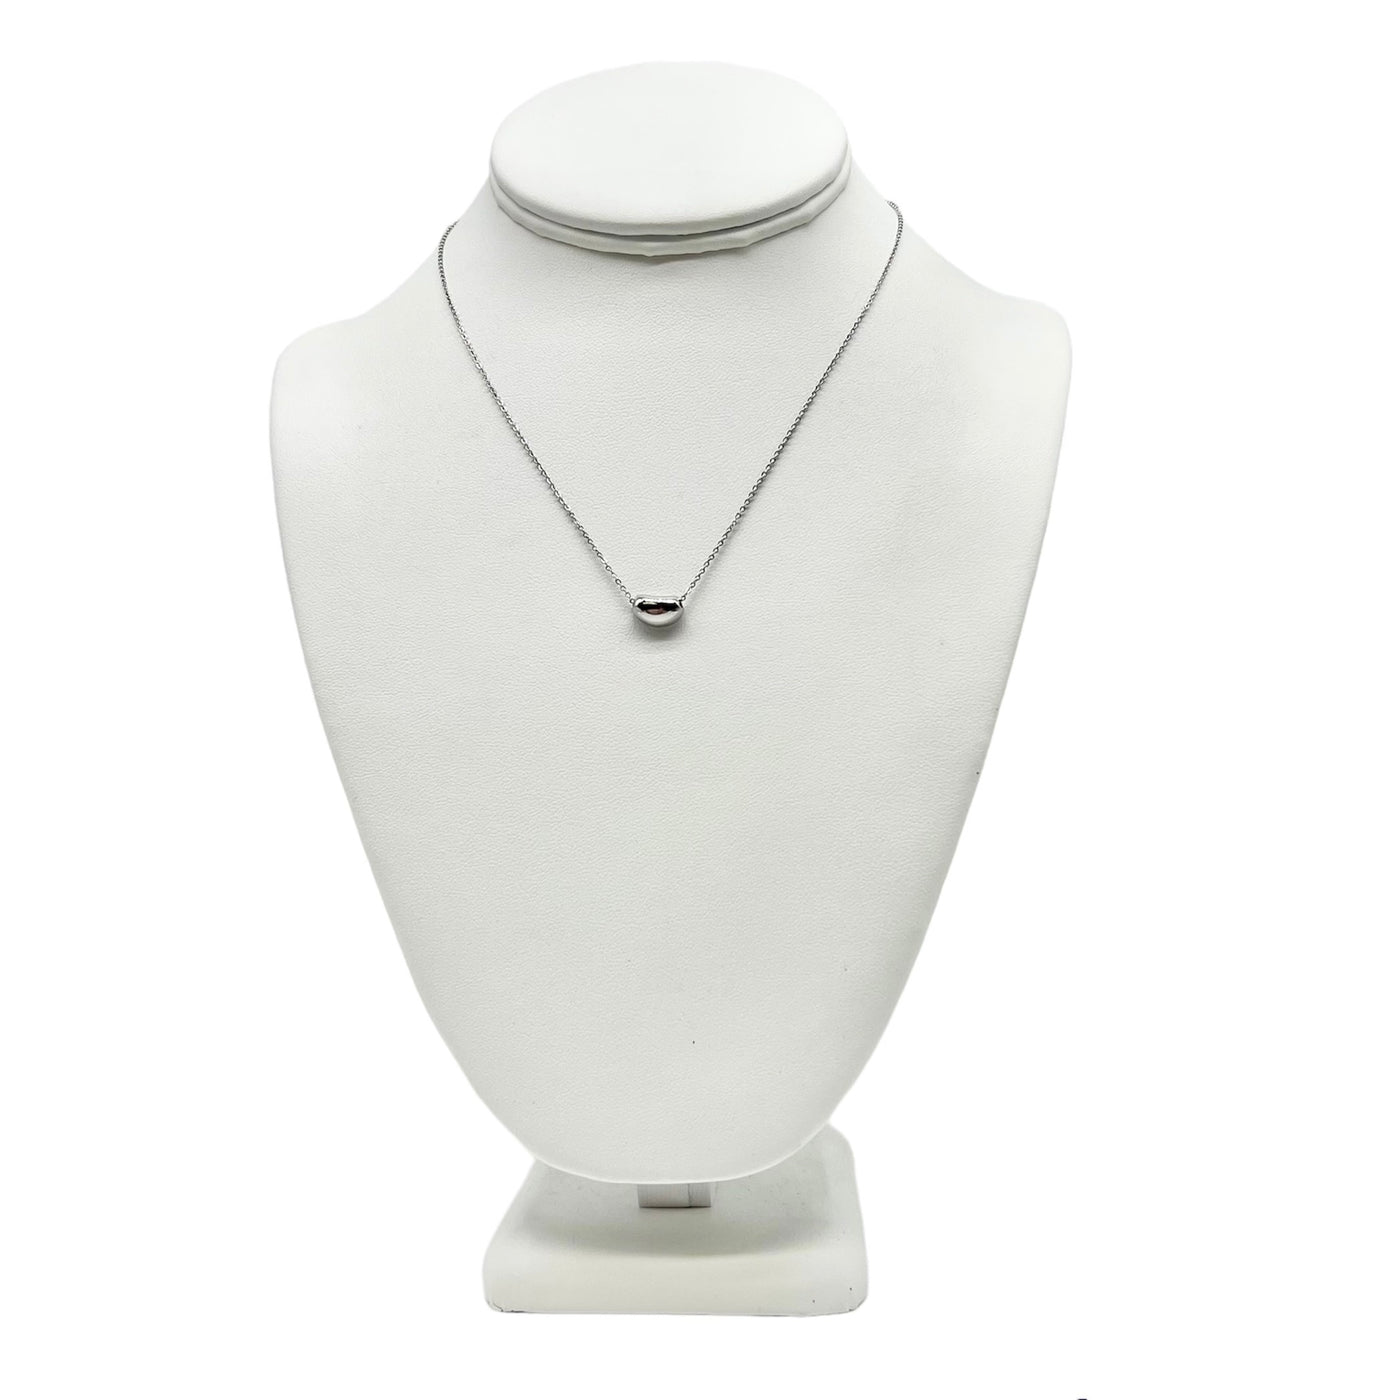 Smooth Finish Bead Pendant Chain Link Necklace